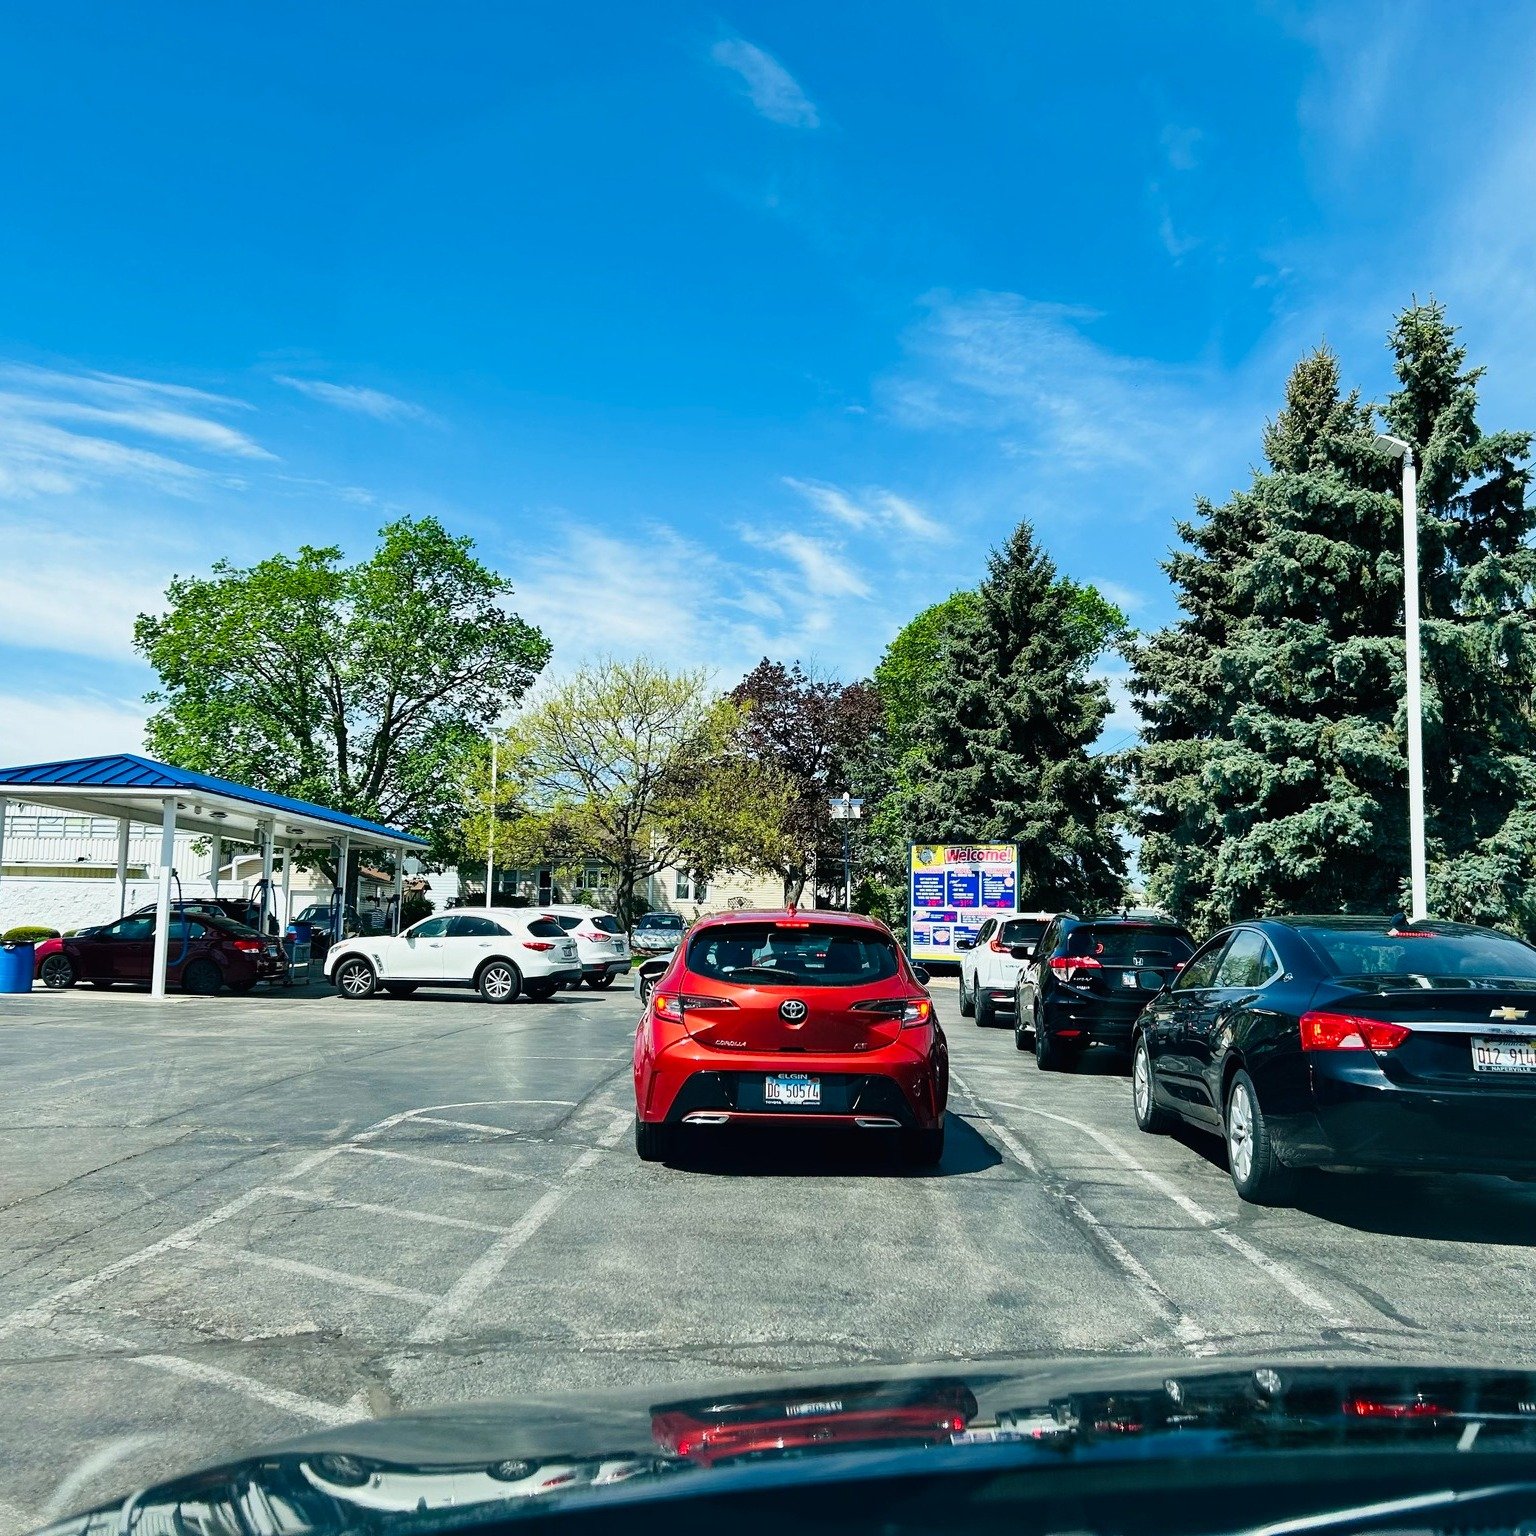 Spring has sprung and what better way to take advantage of the beautiful weather than a trip to our local car wash (@fasteddiescarwash) to get the last remnants of winter off our cars! Our team had a blast, and our rides look great. Check out one of 